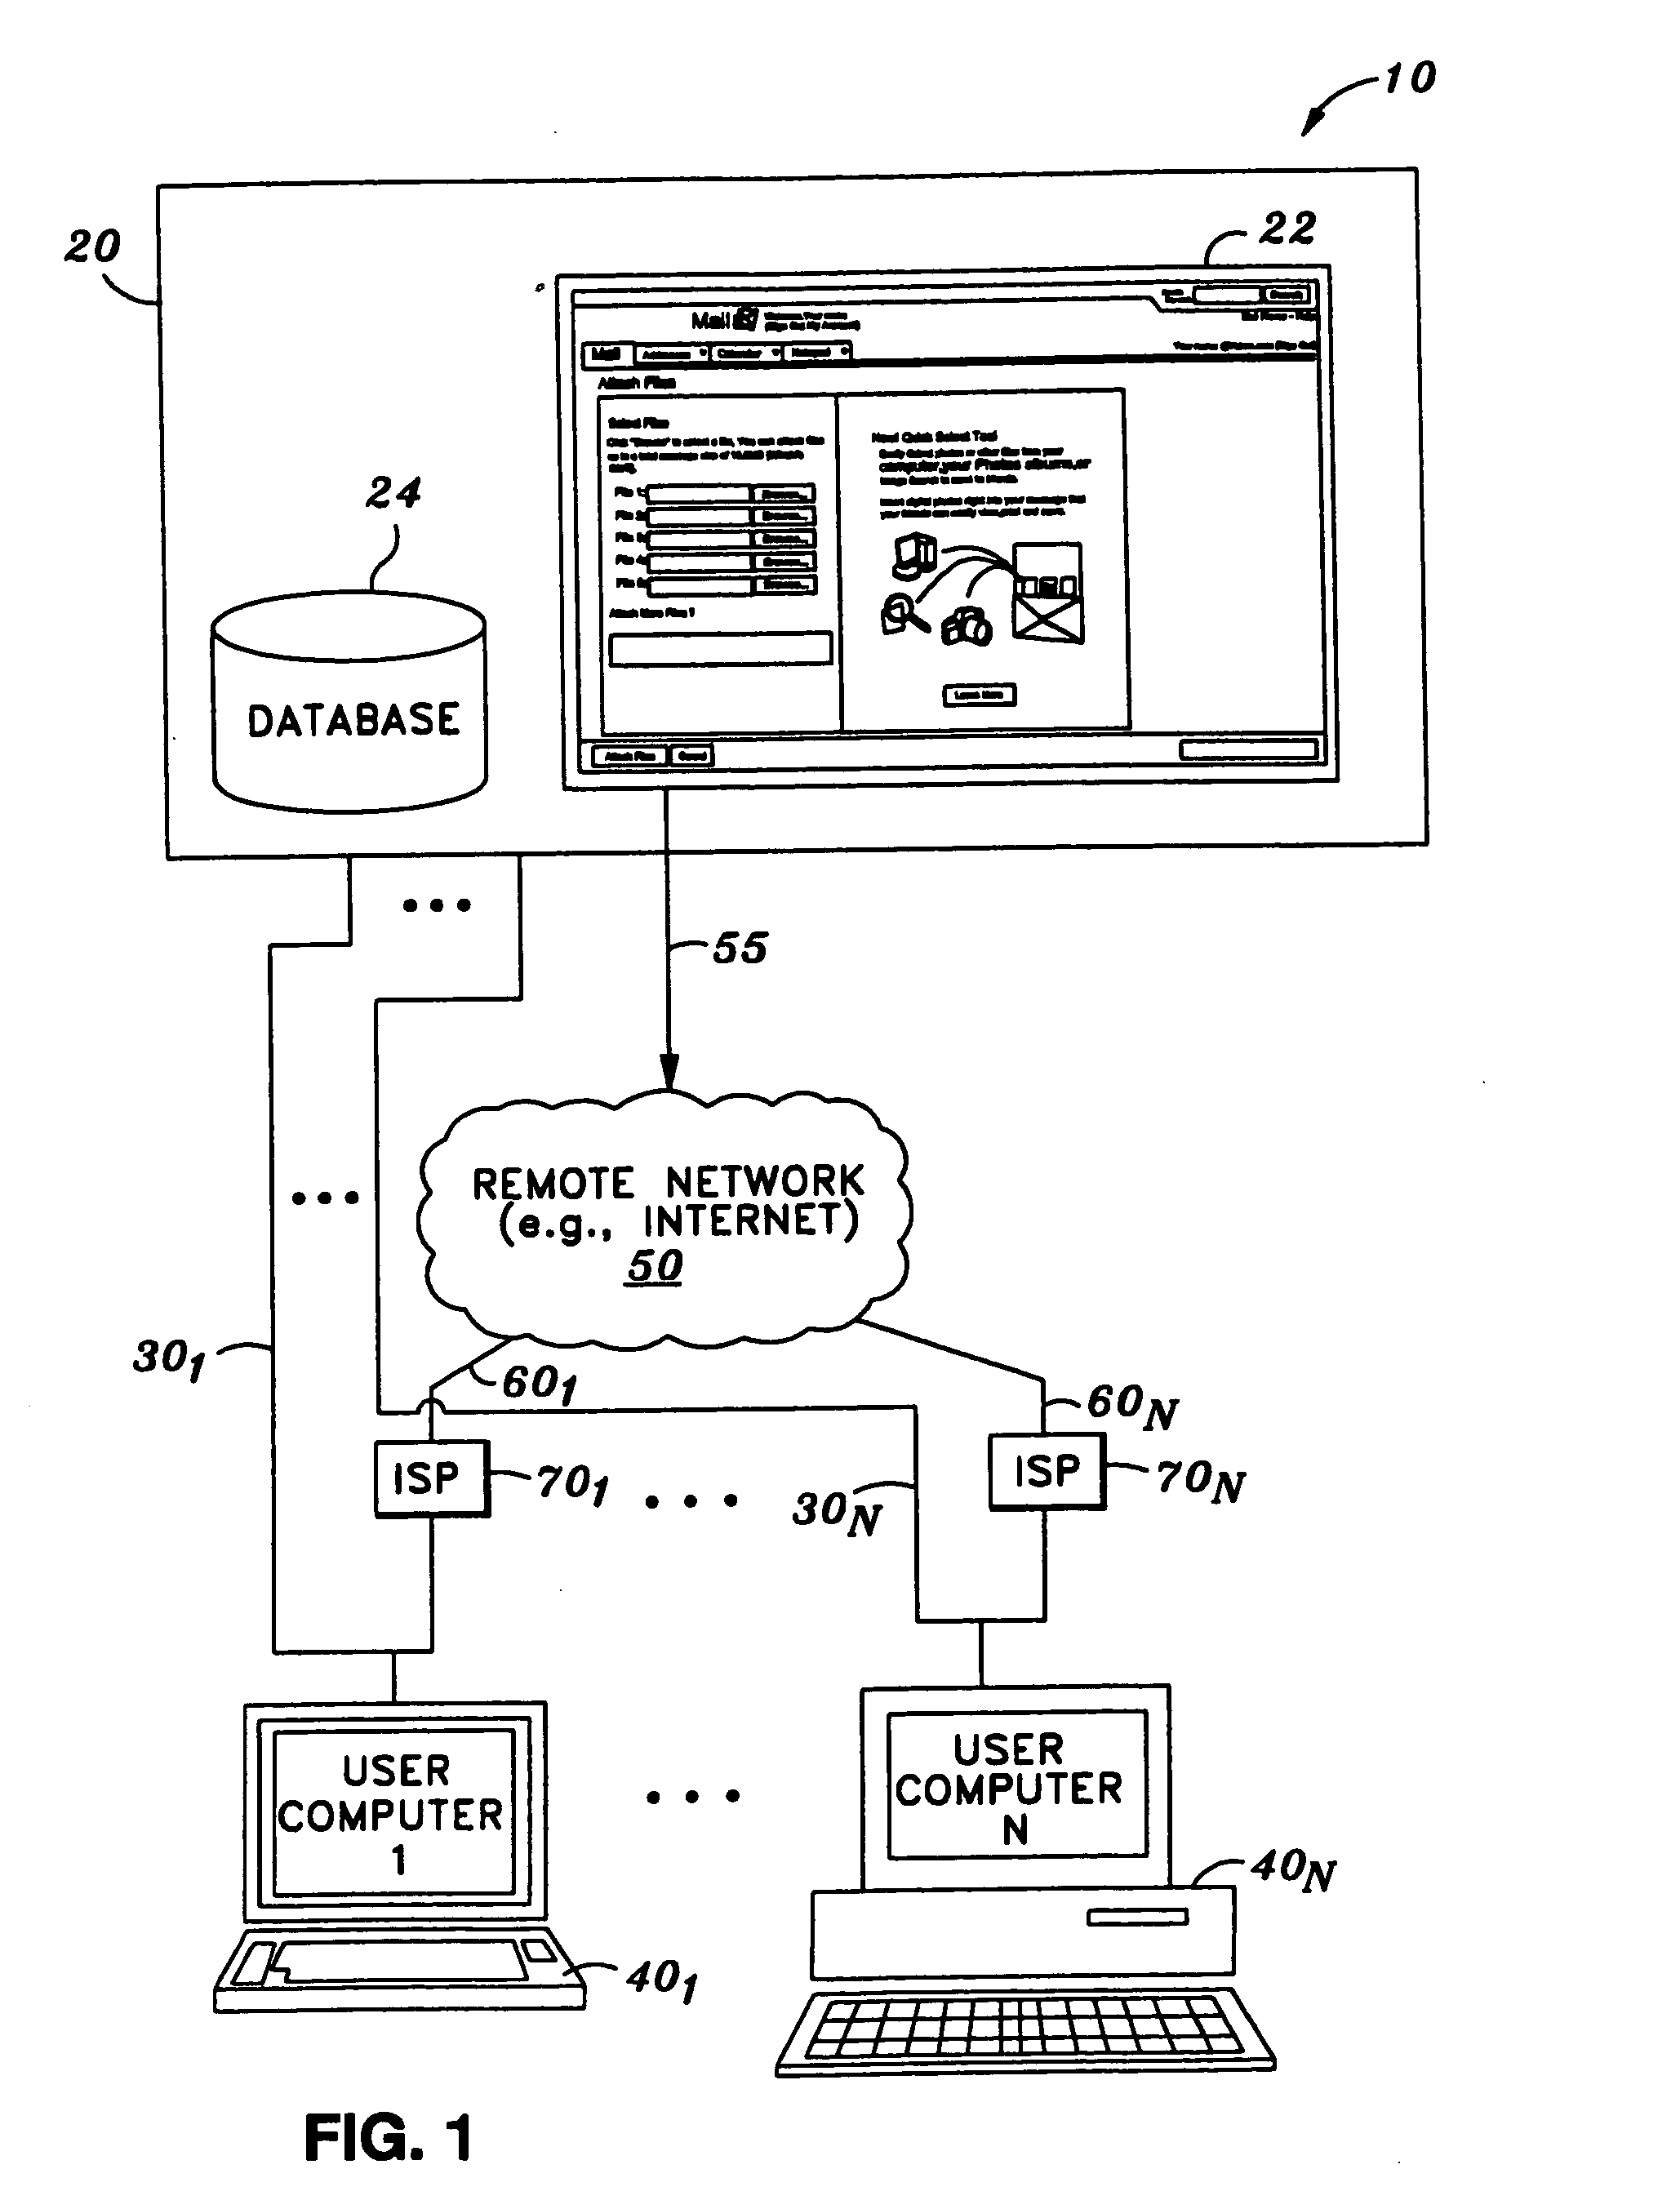 System and method for improving online search engine results